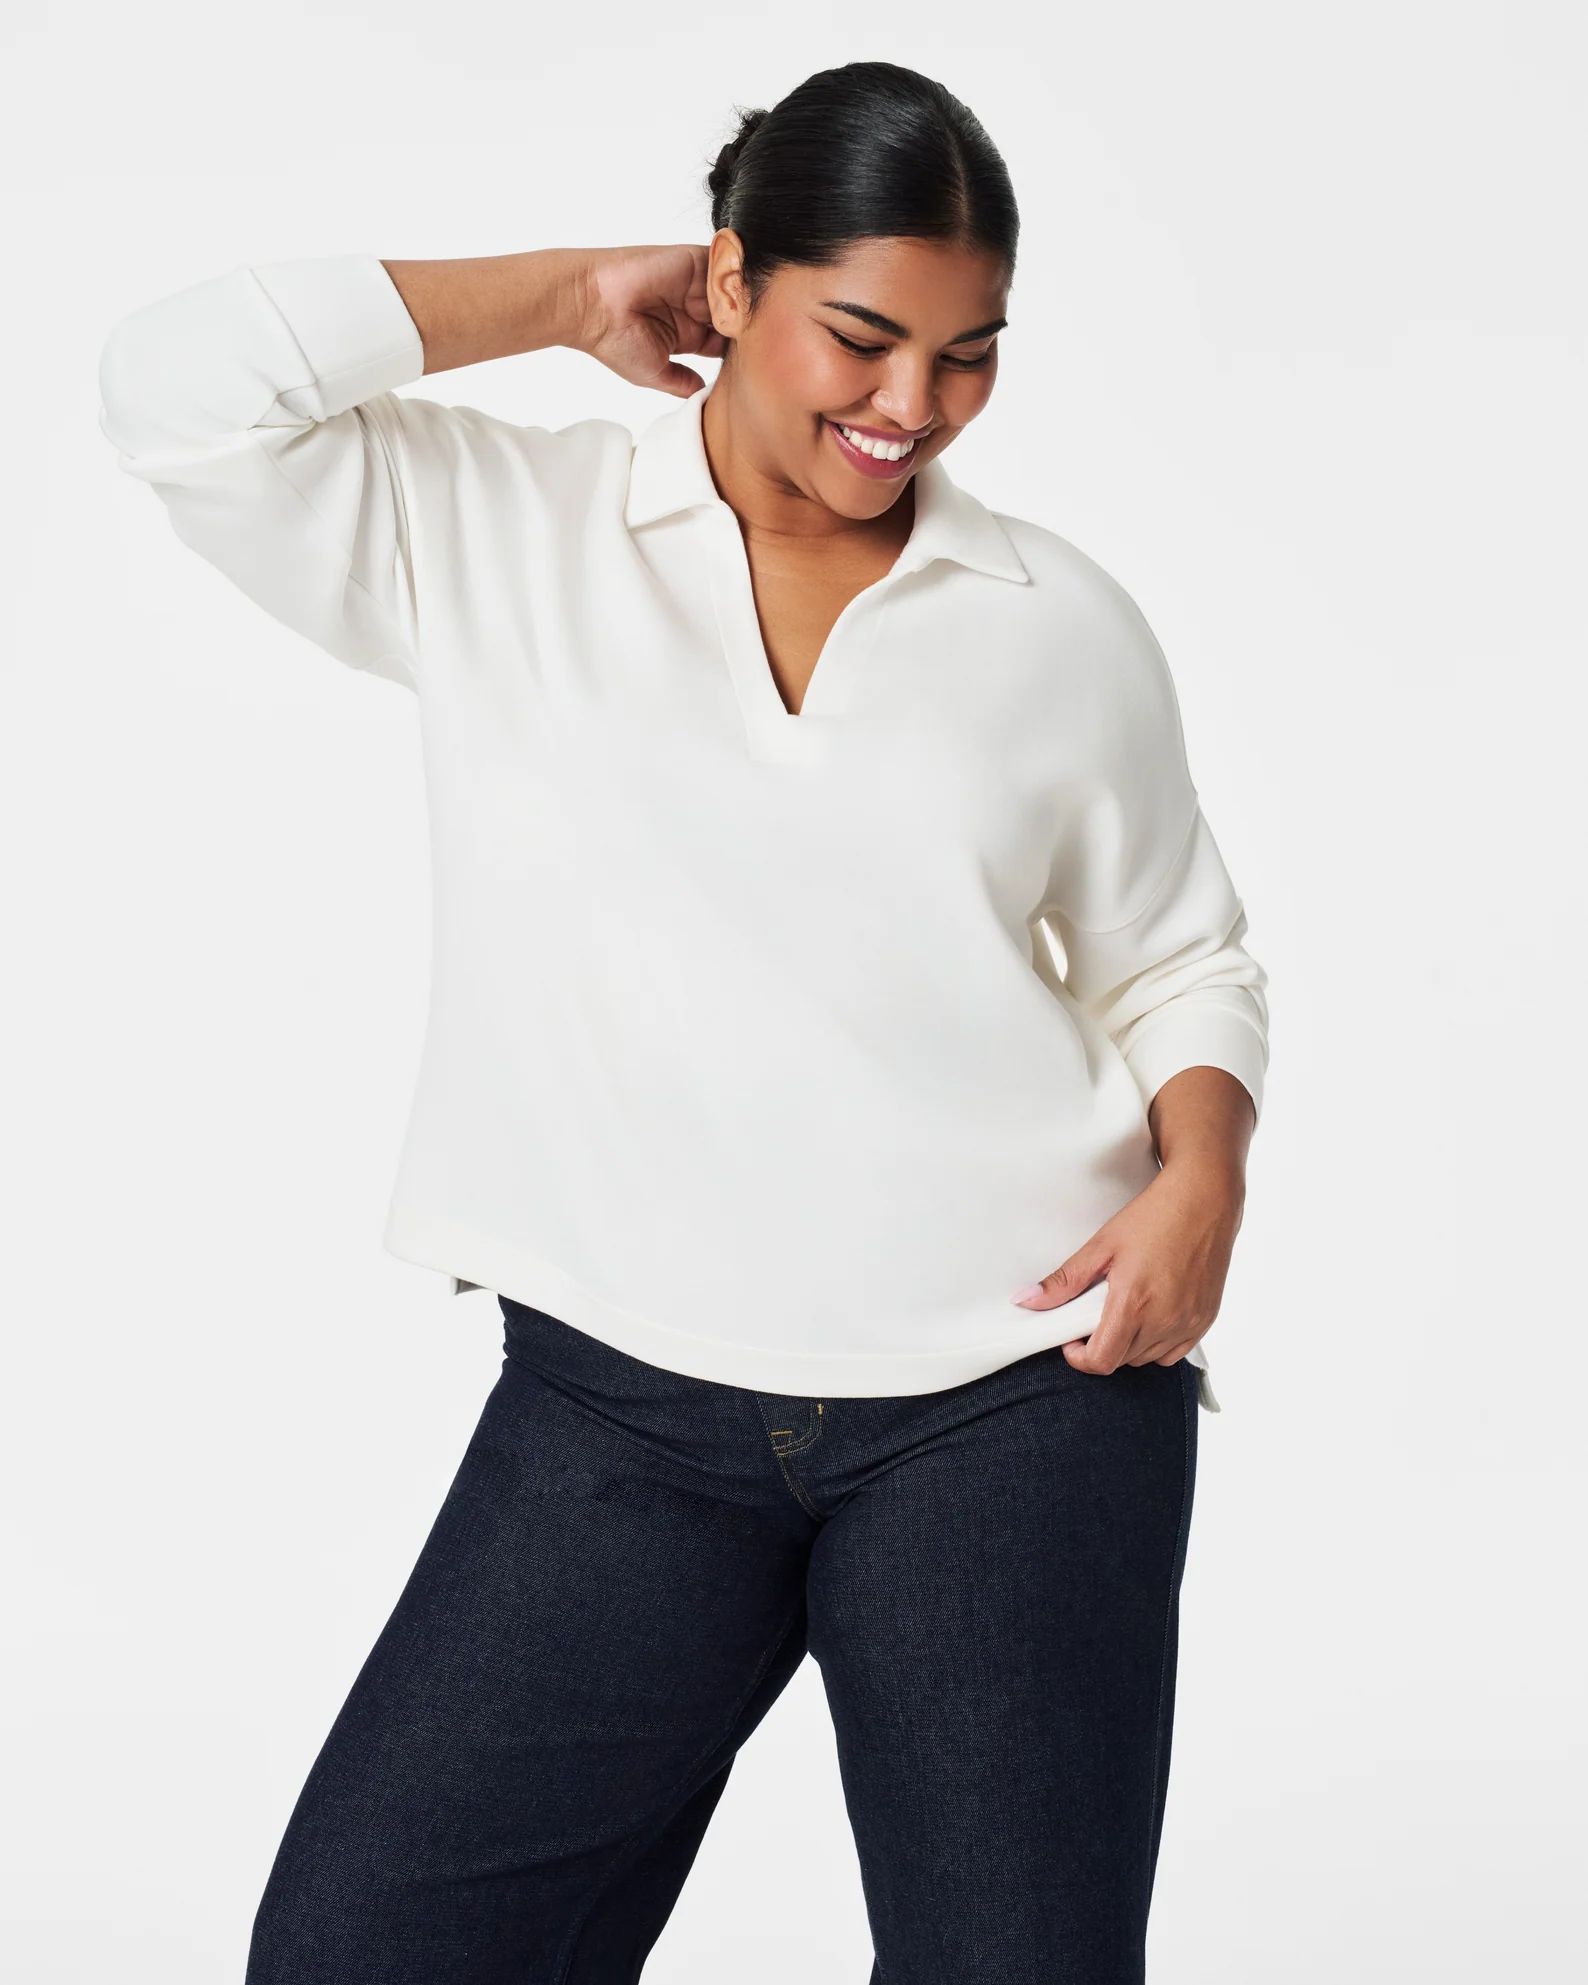 AirEssentials Polo Top | Spanx